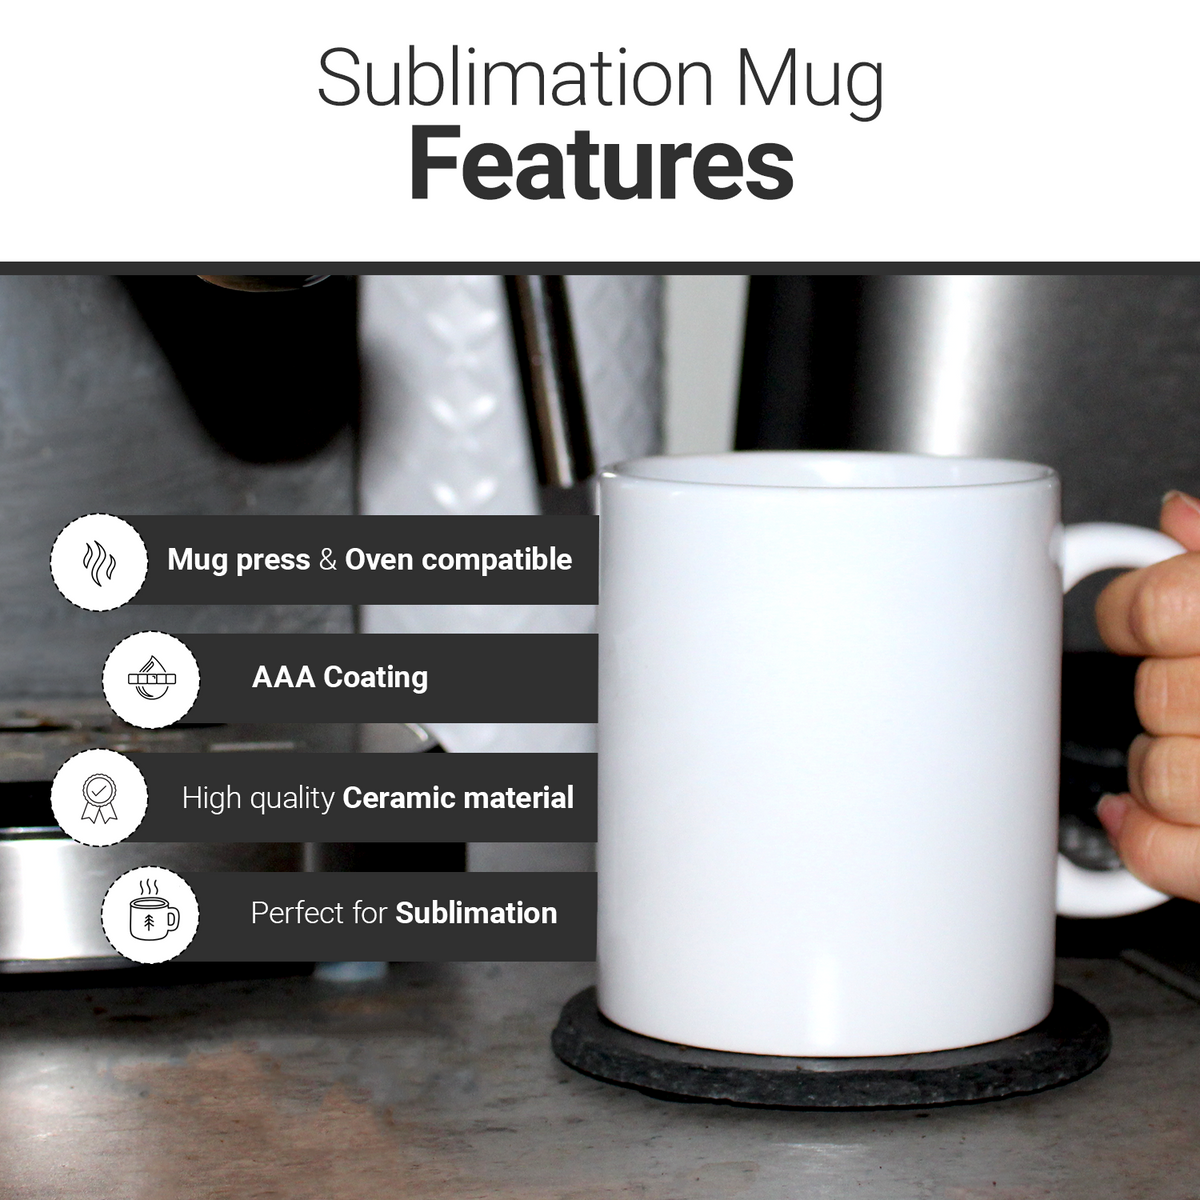 SDN CUSTOM Navy Ceramic 15oz Sublimation Cup with AAA Coating, Sublimation  Coffee Mugs, Oven & Mug Press Compatible, Ideal for Printing & DIY Gifts